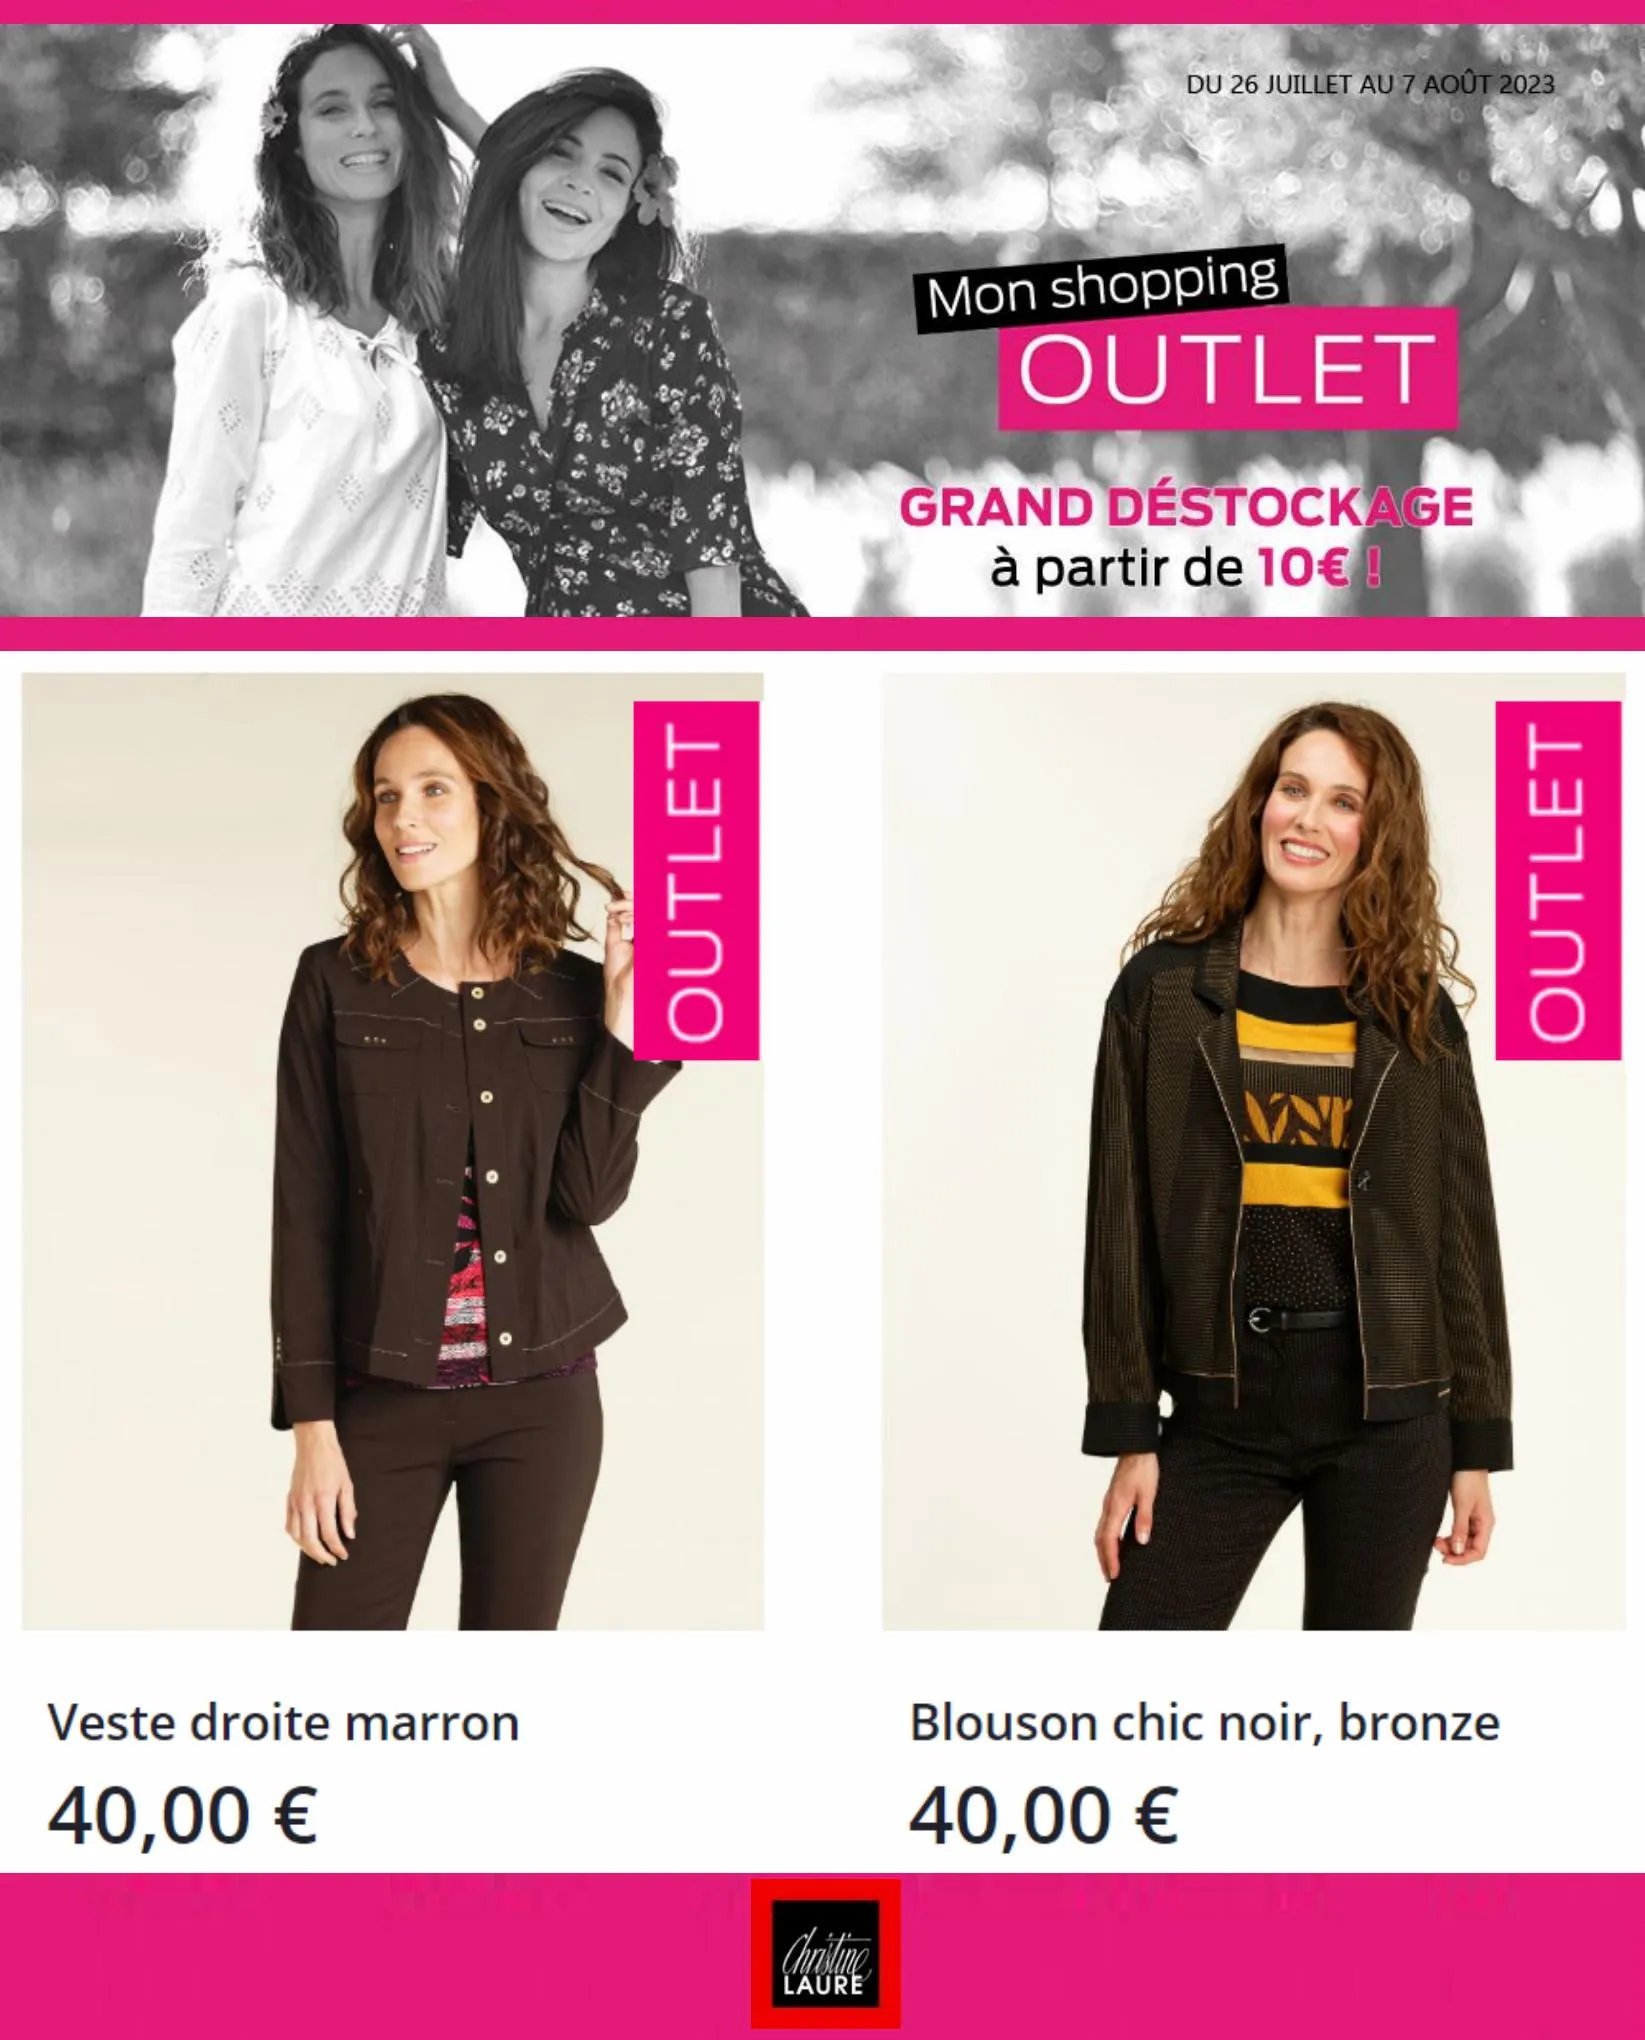 Catalogue Mon Shopping Outlet, page 00007